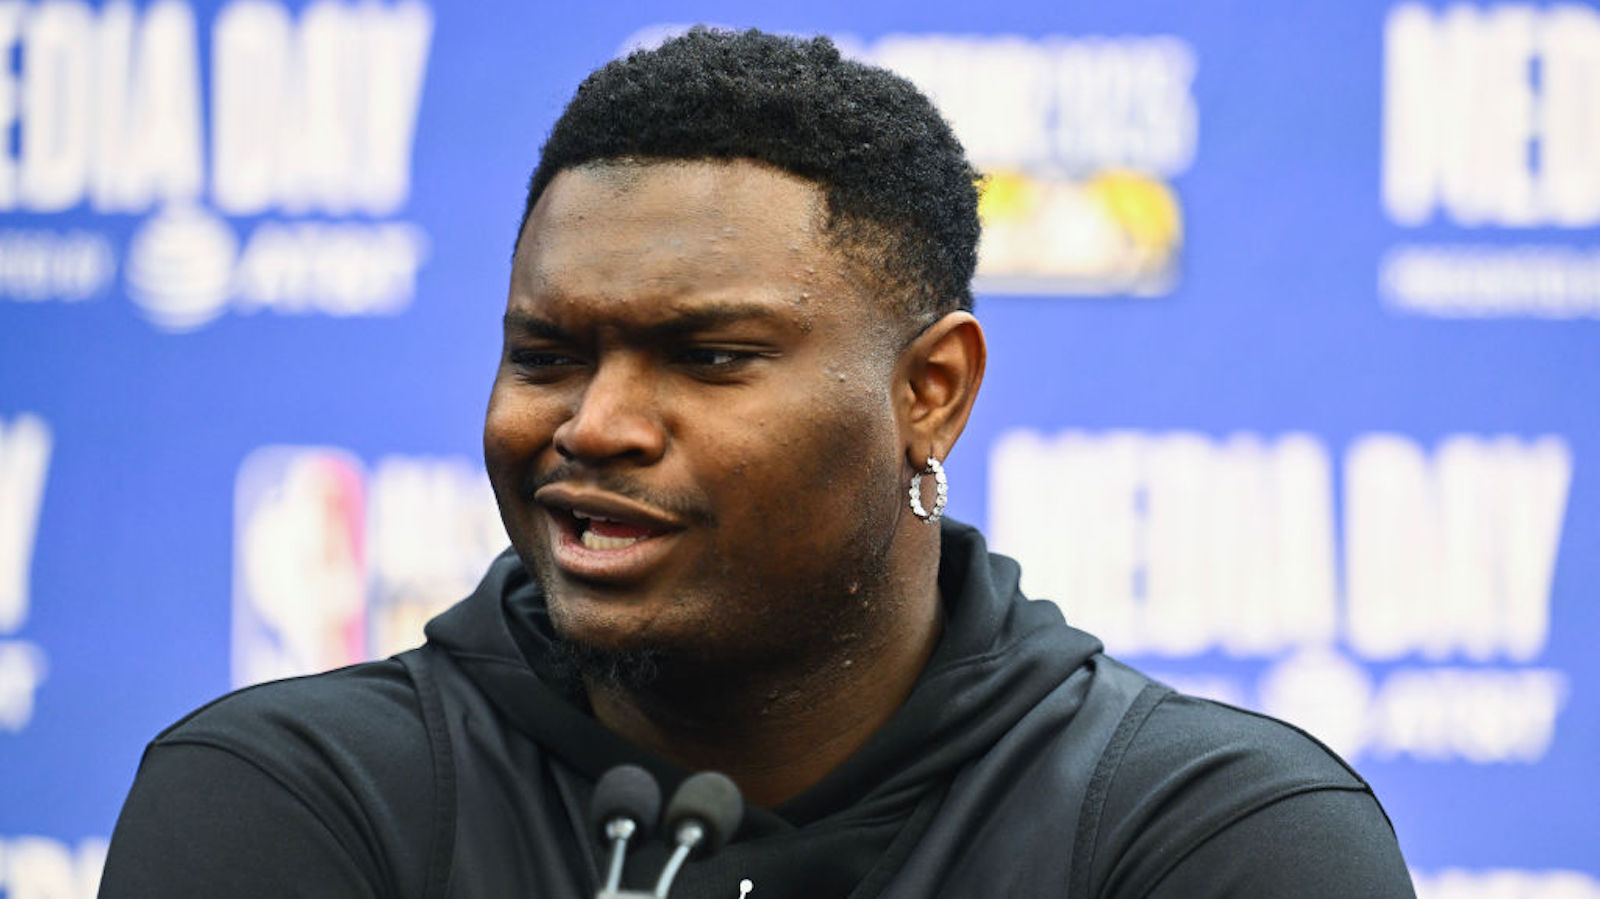 SALT LAKE CITY, UTAH - FEBRUARY 18: Zion Williamson of the New Orleans Pelicans speaks during media availability as part of 2023 NBA All Star Weekend on February 18, 2023 in Salt Lake City, Utah. NOTE TO USER: User expressly acknowledges and agrees that, by downloading and or using this photograph, User is consenting to the terms and conditions of the Getty Images License Agreement.